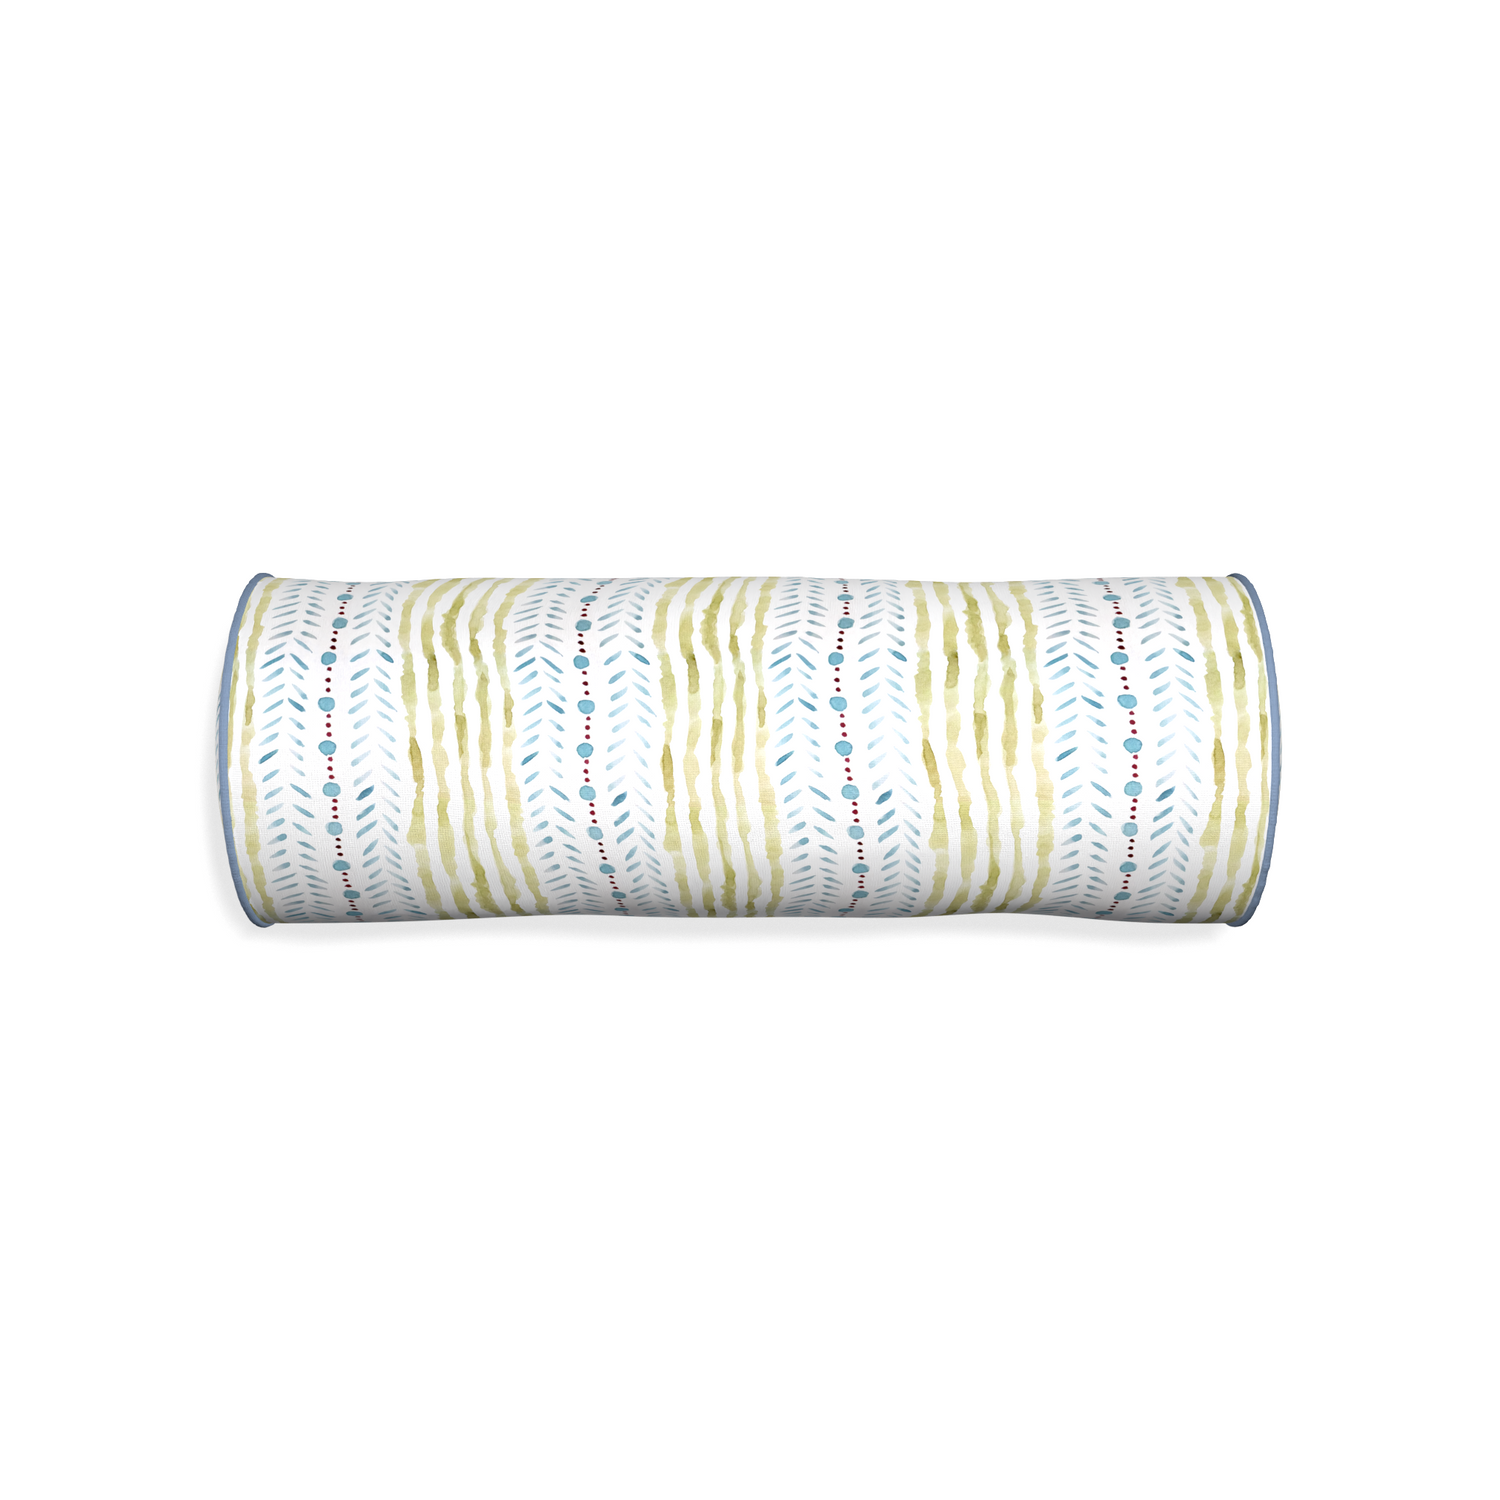 Bolster julia custom blue & green stripedpillow with sky piping on white background